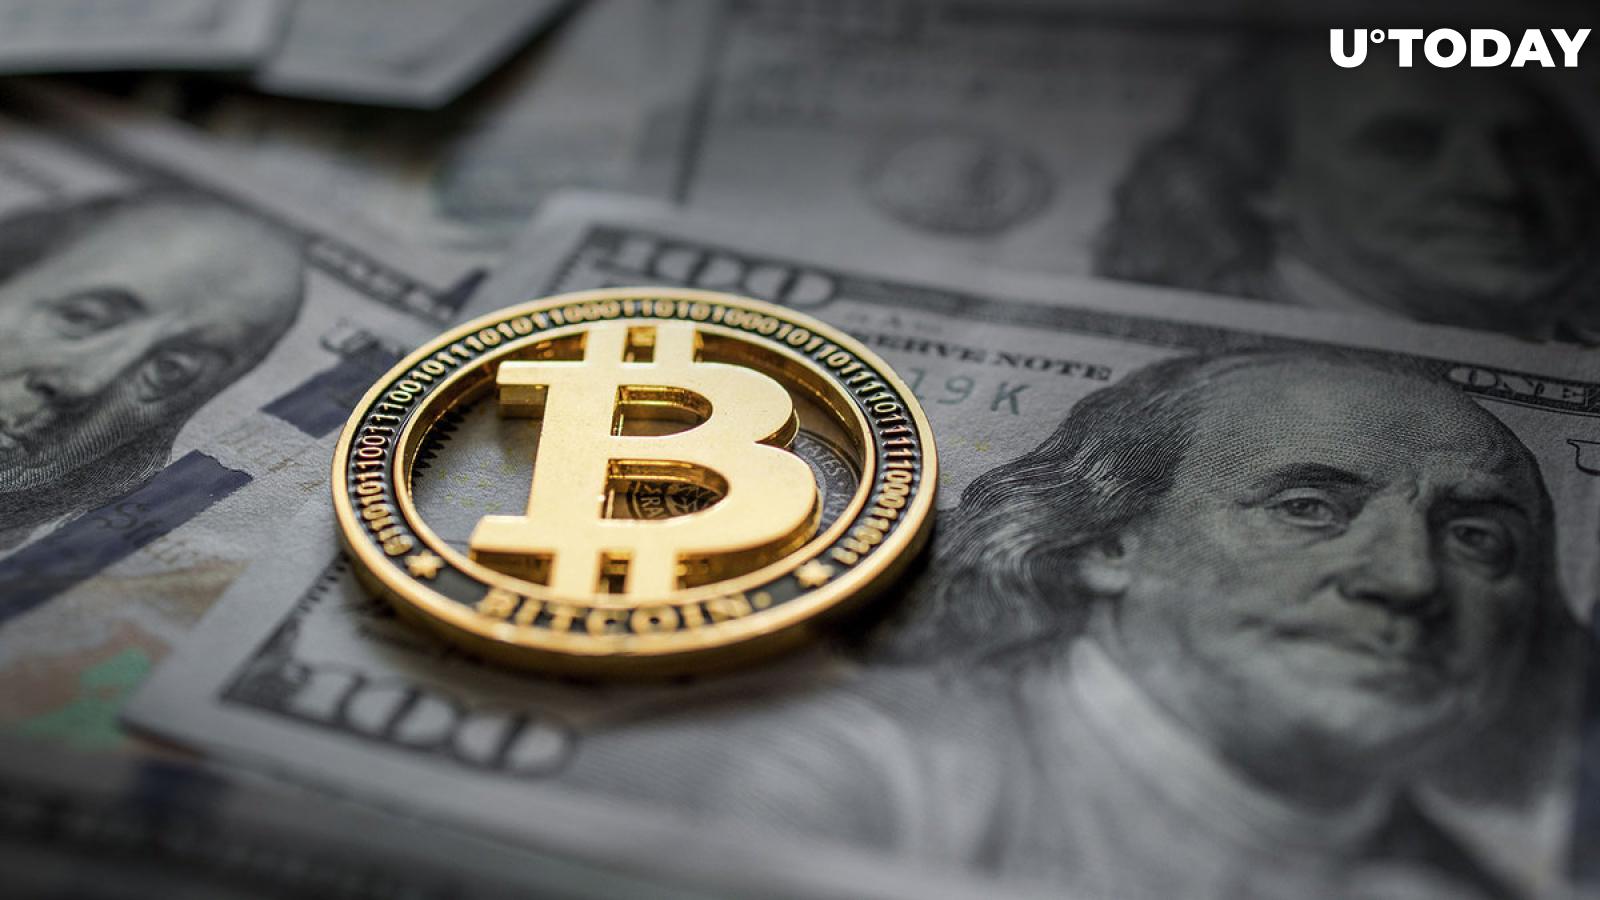 US-Based Wealth Management Firm Gets Into Bitcoin